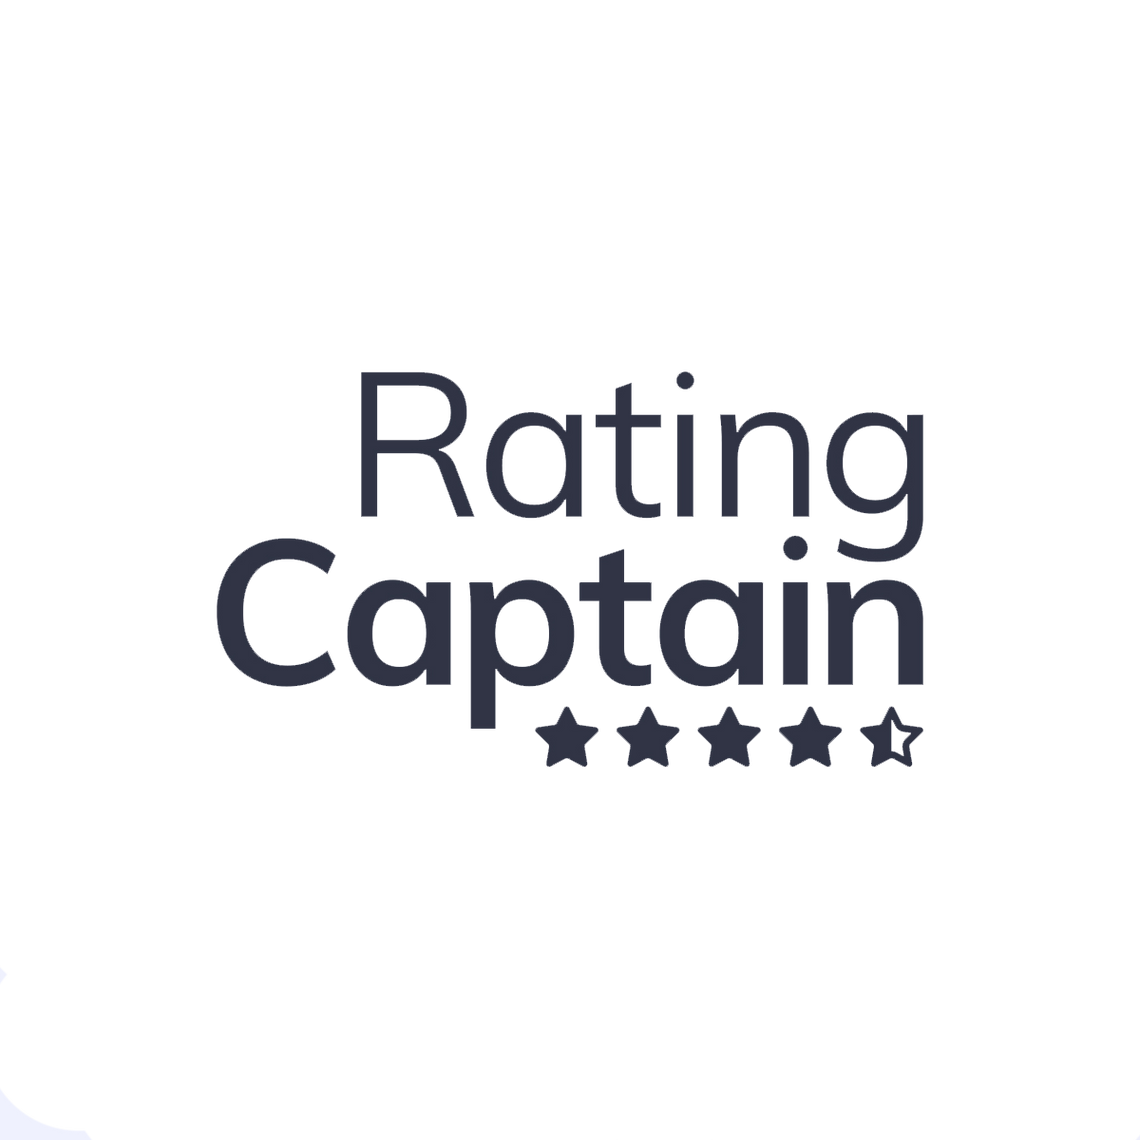 Customer Experience - Rating Captain